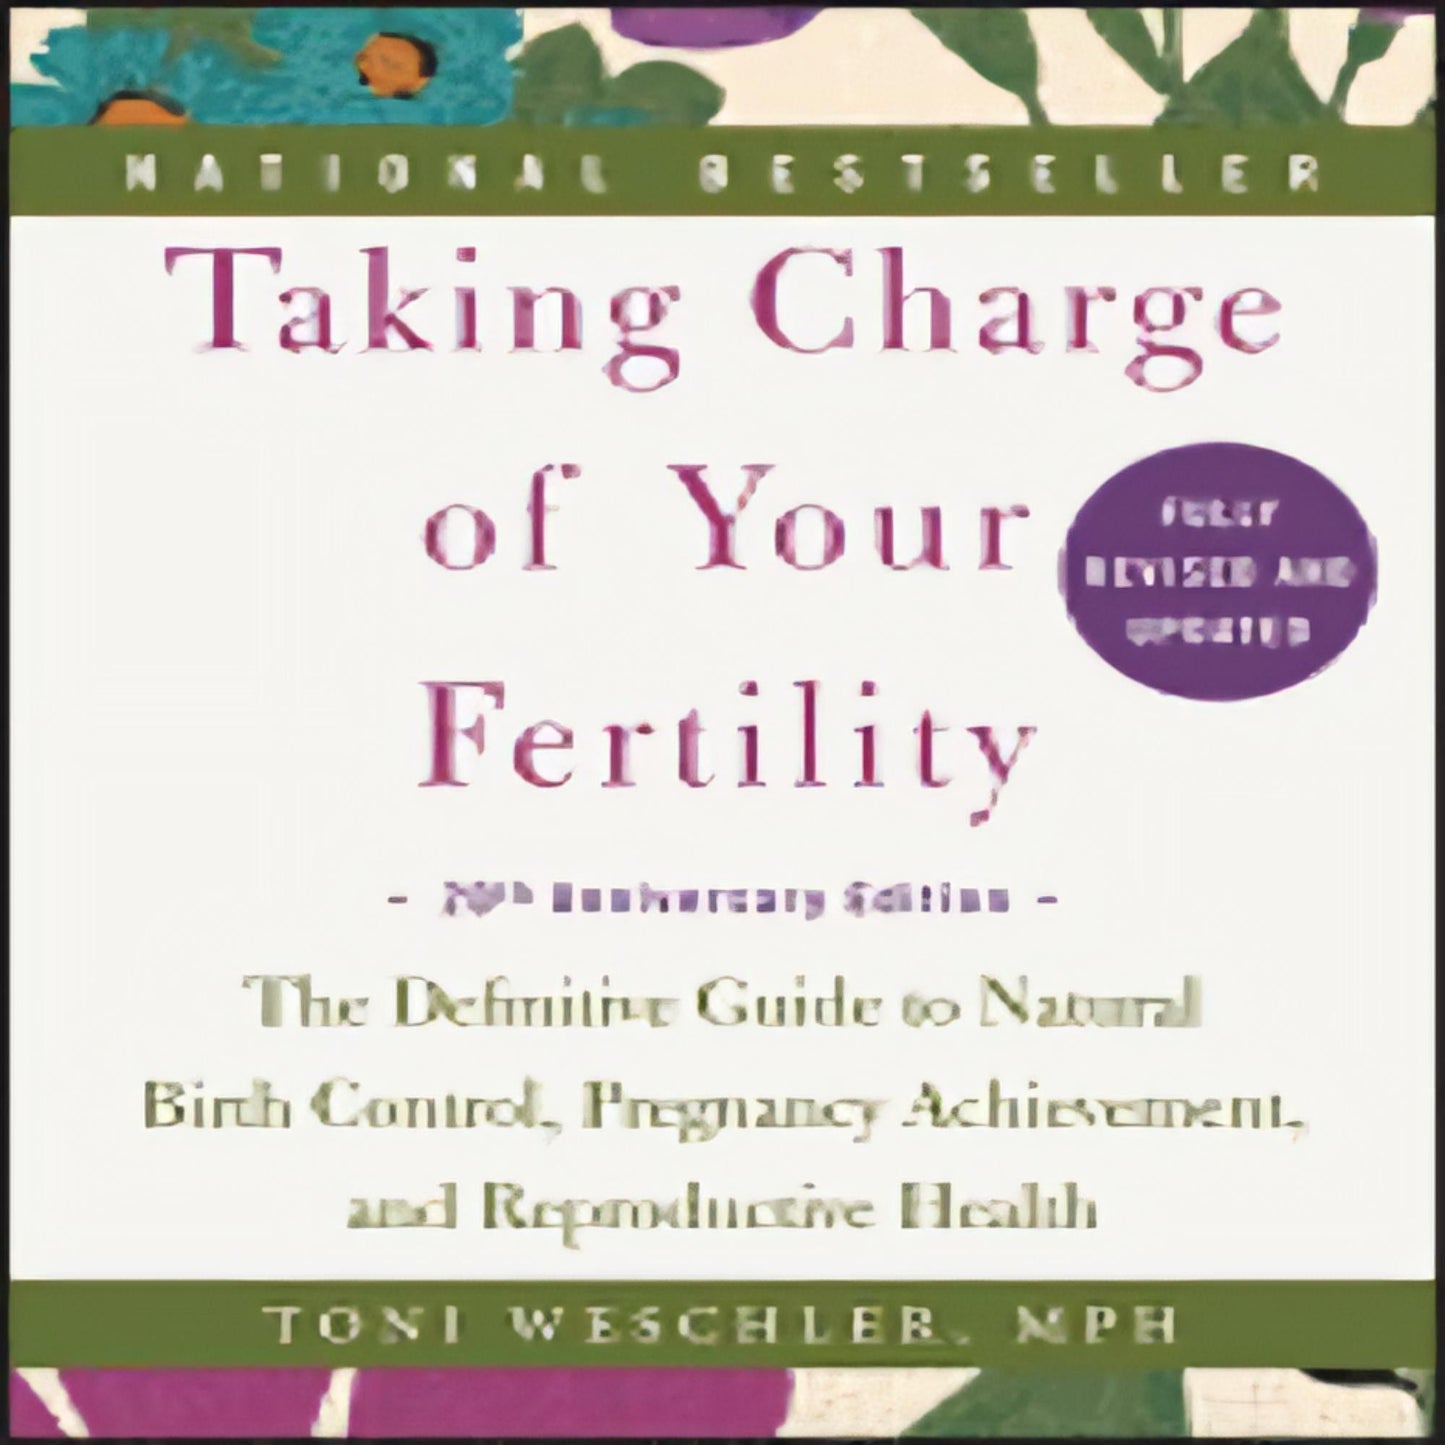 Taking Charge of Your Fertility: The Definitive Guide to Natural Birth Control, Pregnancy Achievement, and Reproductive Health (Anniversary) (20TH ed.)203-030423-0062326031DPGBOOKSTORE.COM. Today's Bestsellers.